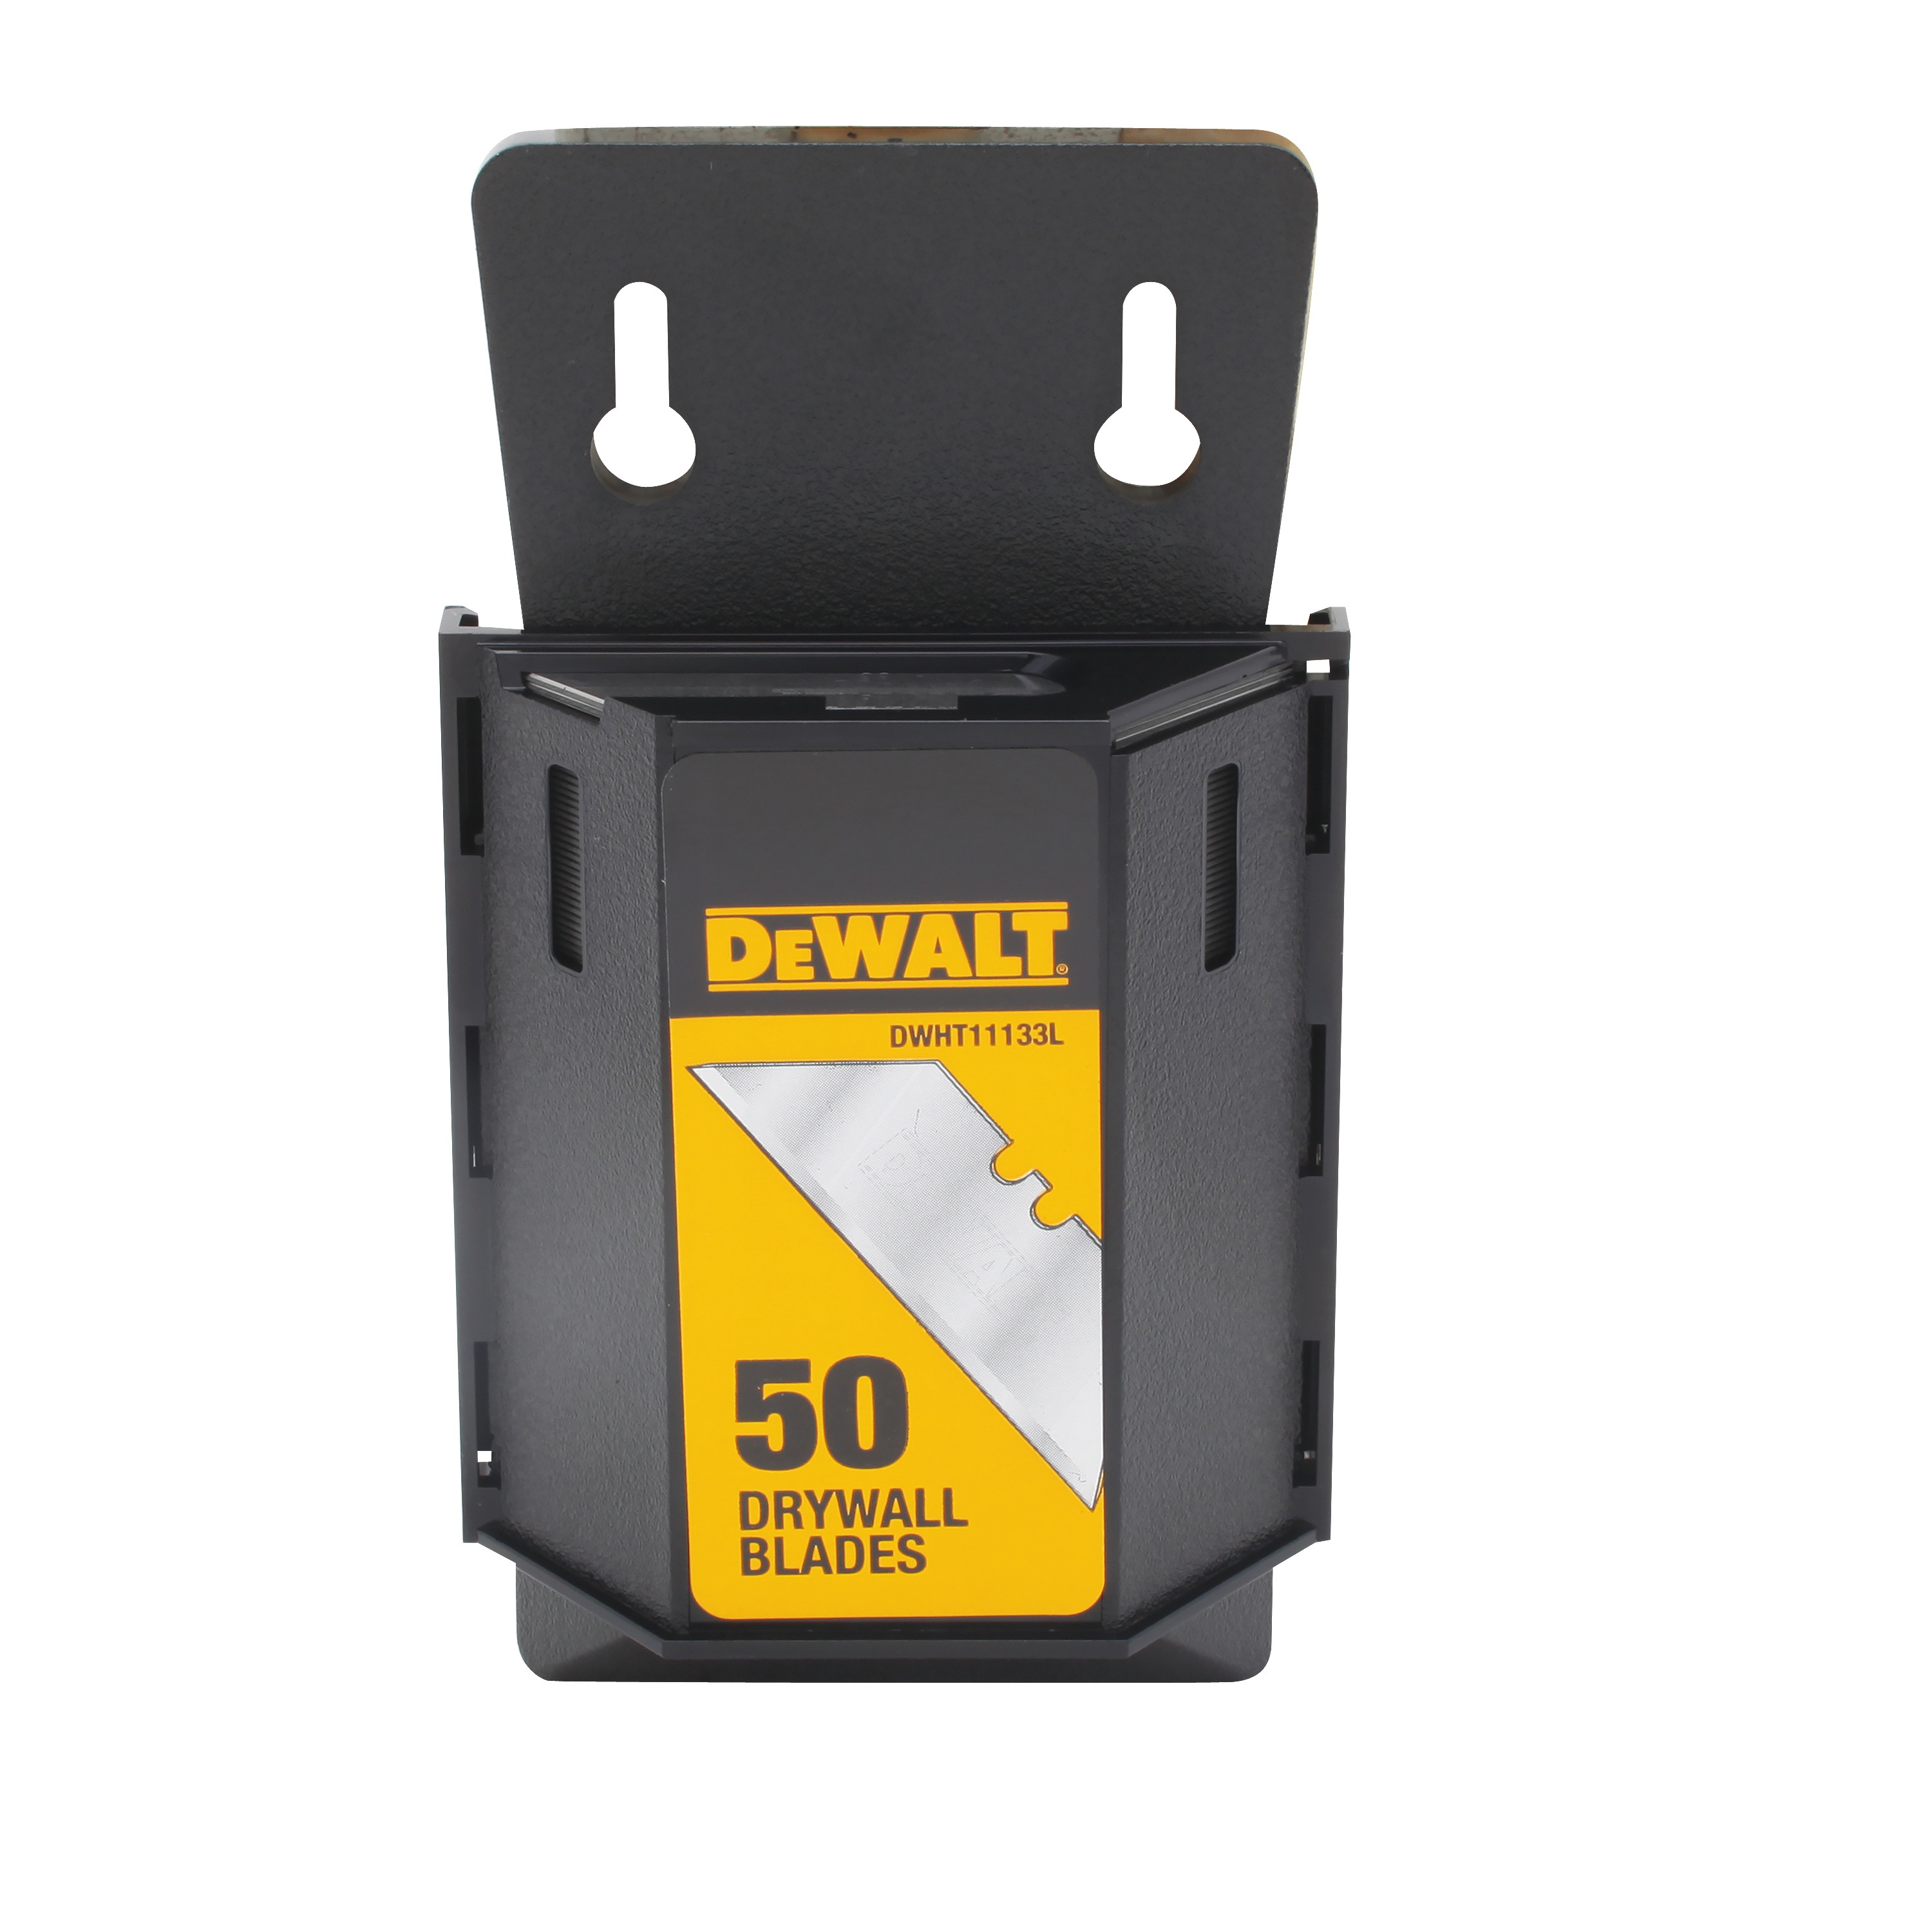 Profile of Drywall Blades 50 Pack. 